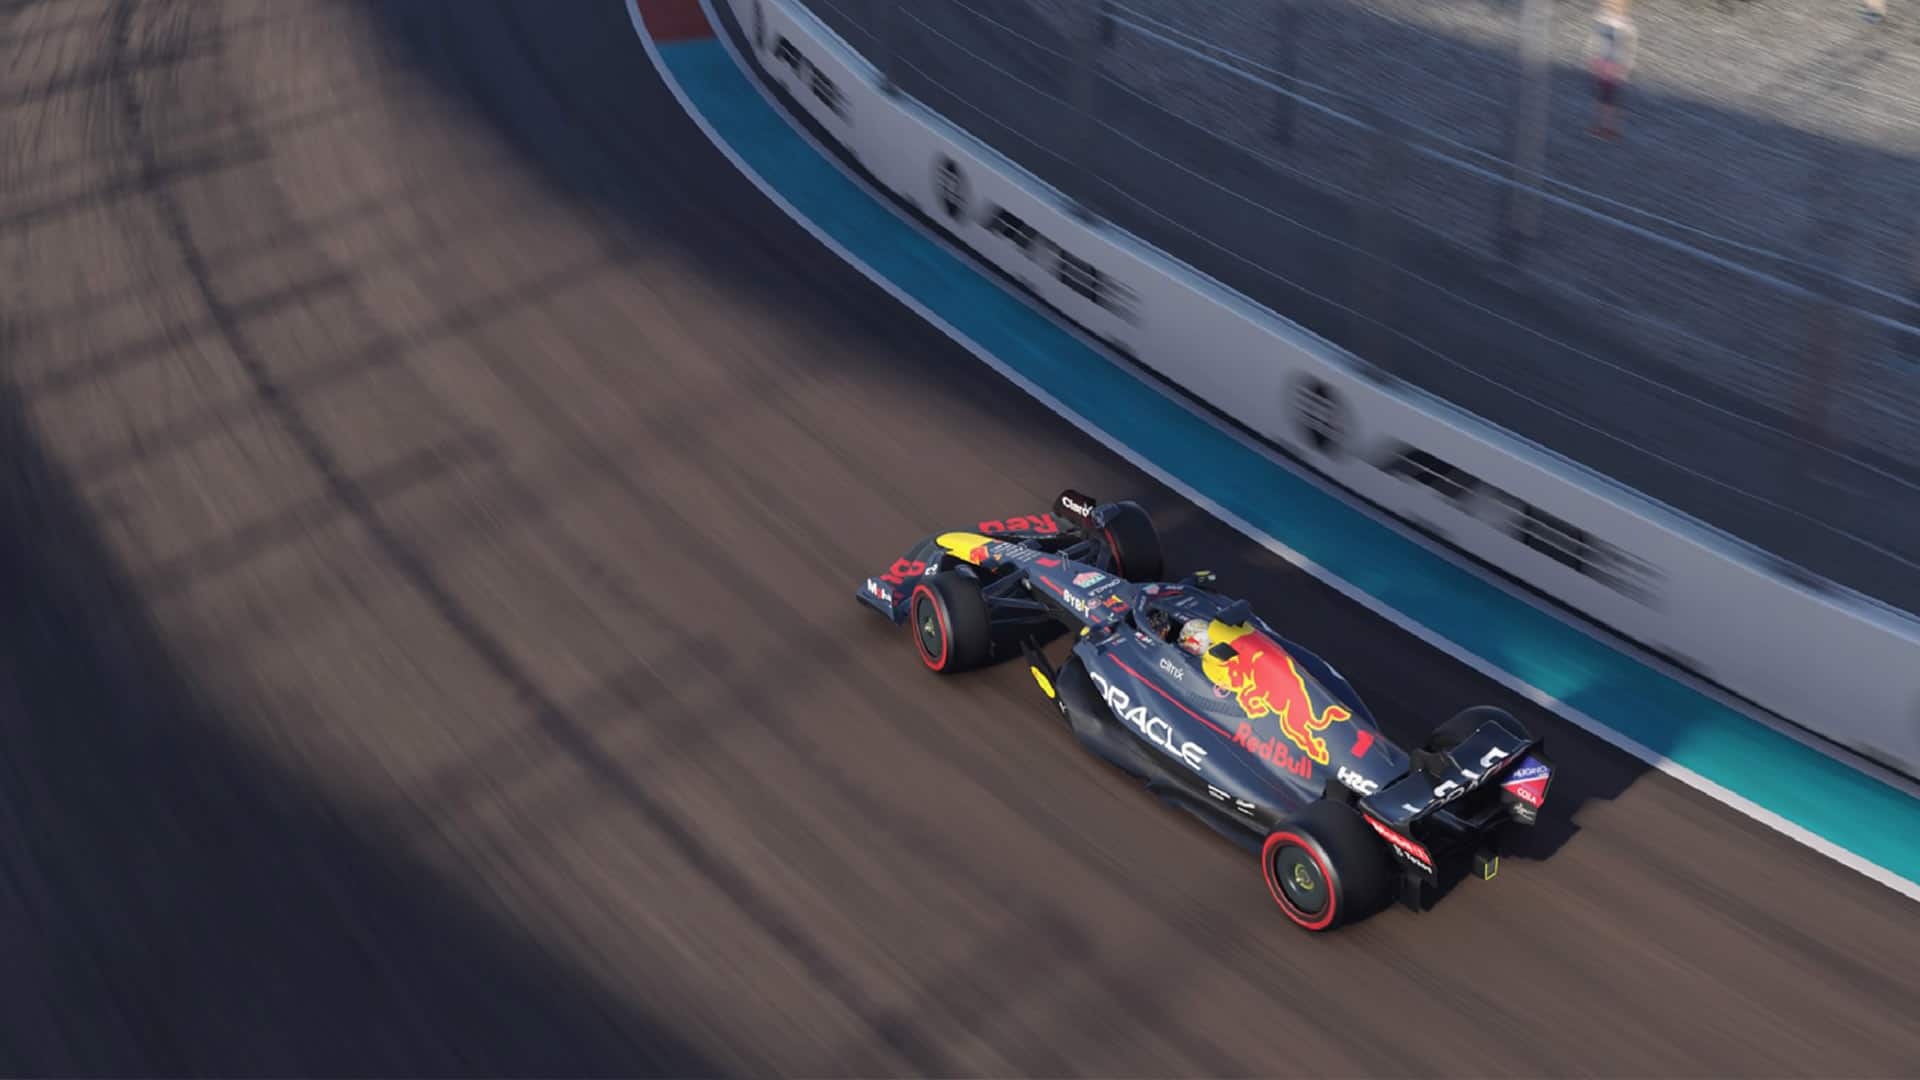 F1 22 was PlayStation's best-selling digital game in July